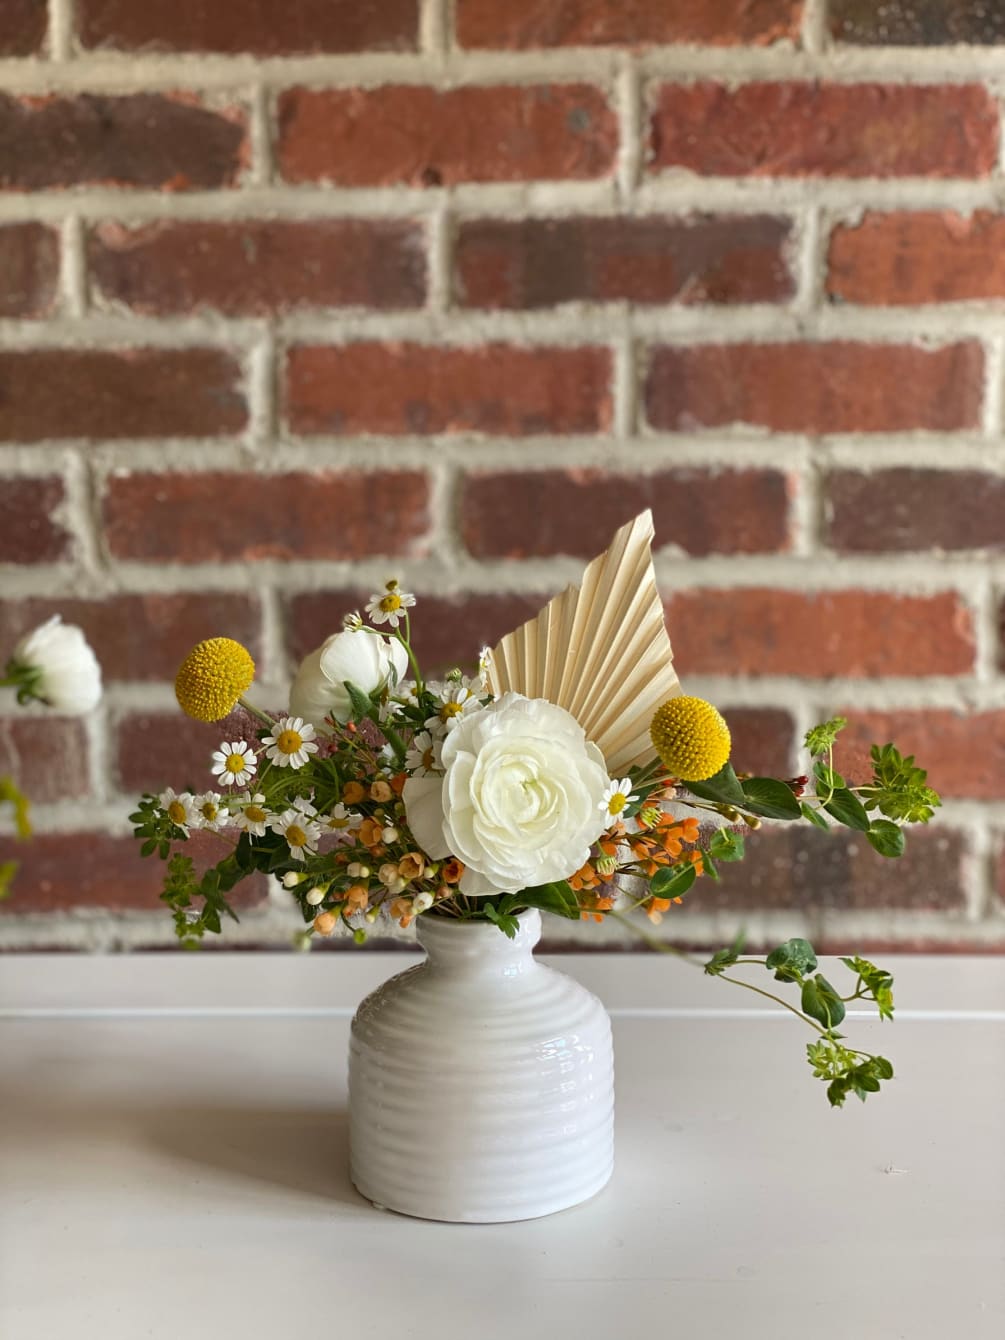 A fun mix of blooms to accent your table set up in